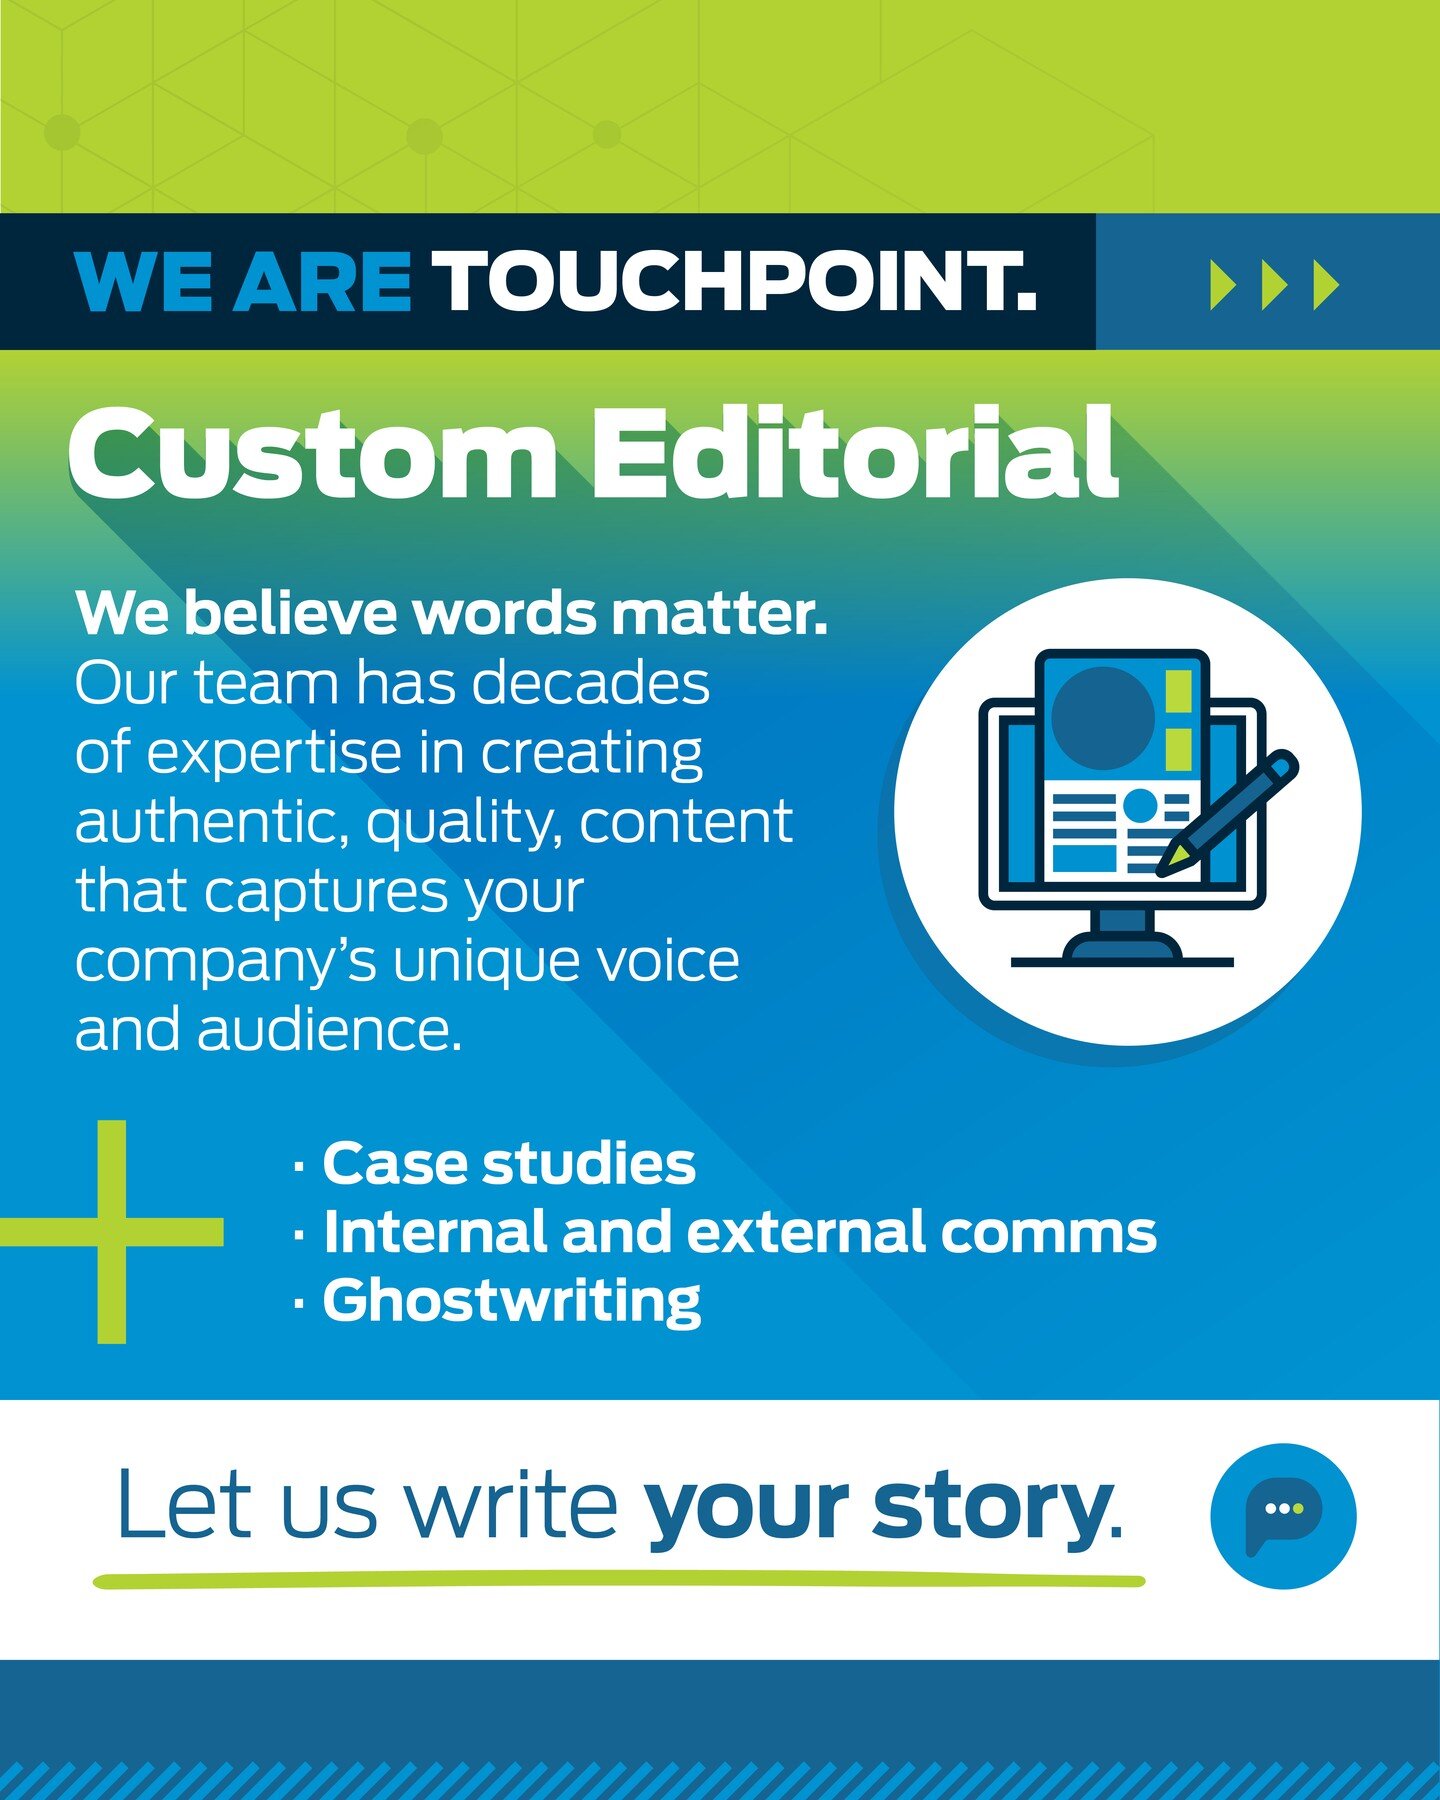 W believe words matter. Our team has decades of expertise in creating authentic, quality, content that captures your company's unique voice and audience.

To explore our custom content, visit our website or email laura@touchpointmedia.com to get in t